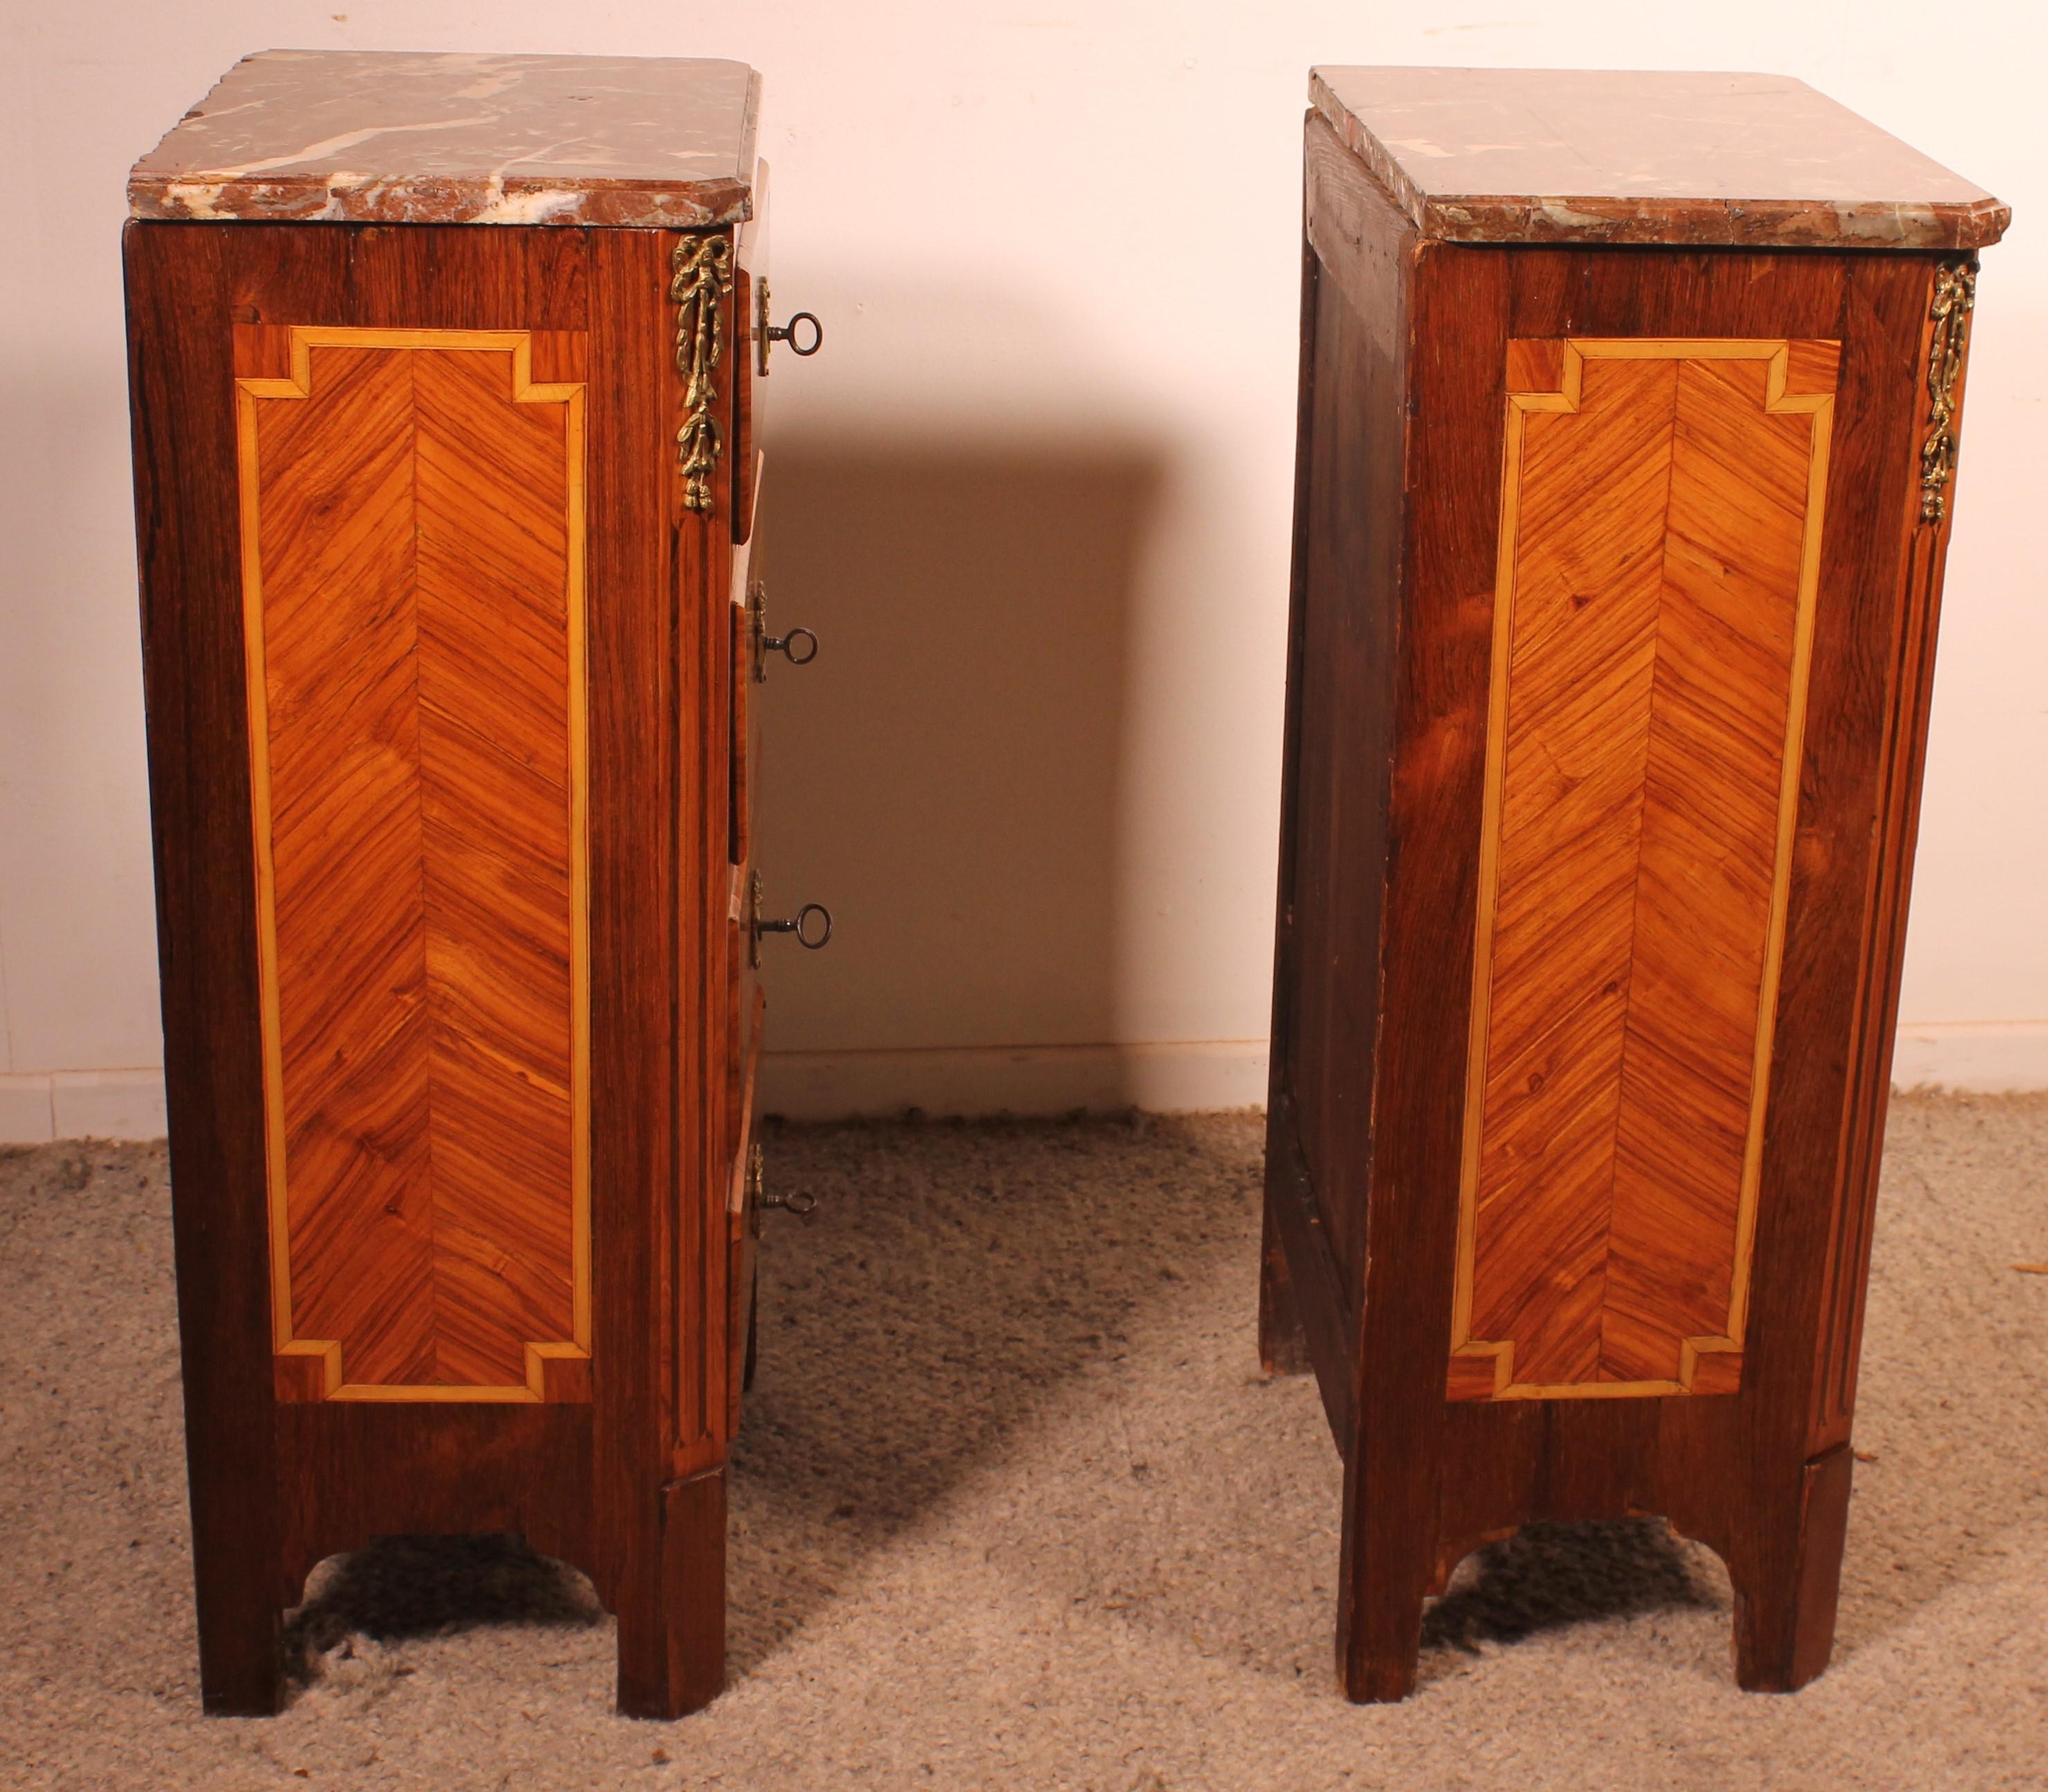 Pair Of Marquetry Bedside Tables - 18th Century From France For Sale 4